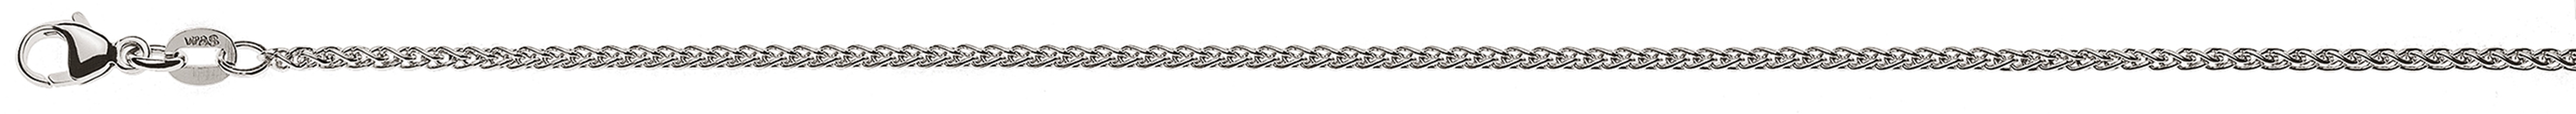 AURONOS Style Necklace white gold 9K cable chain 42cm 1.65mm